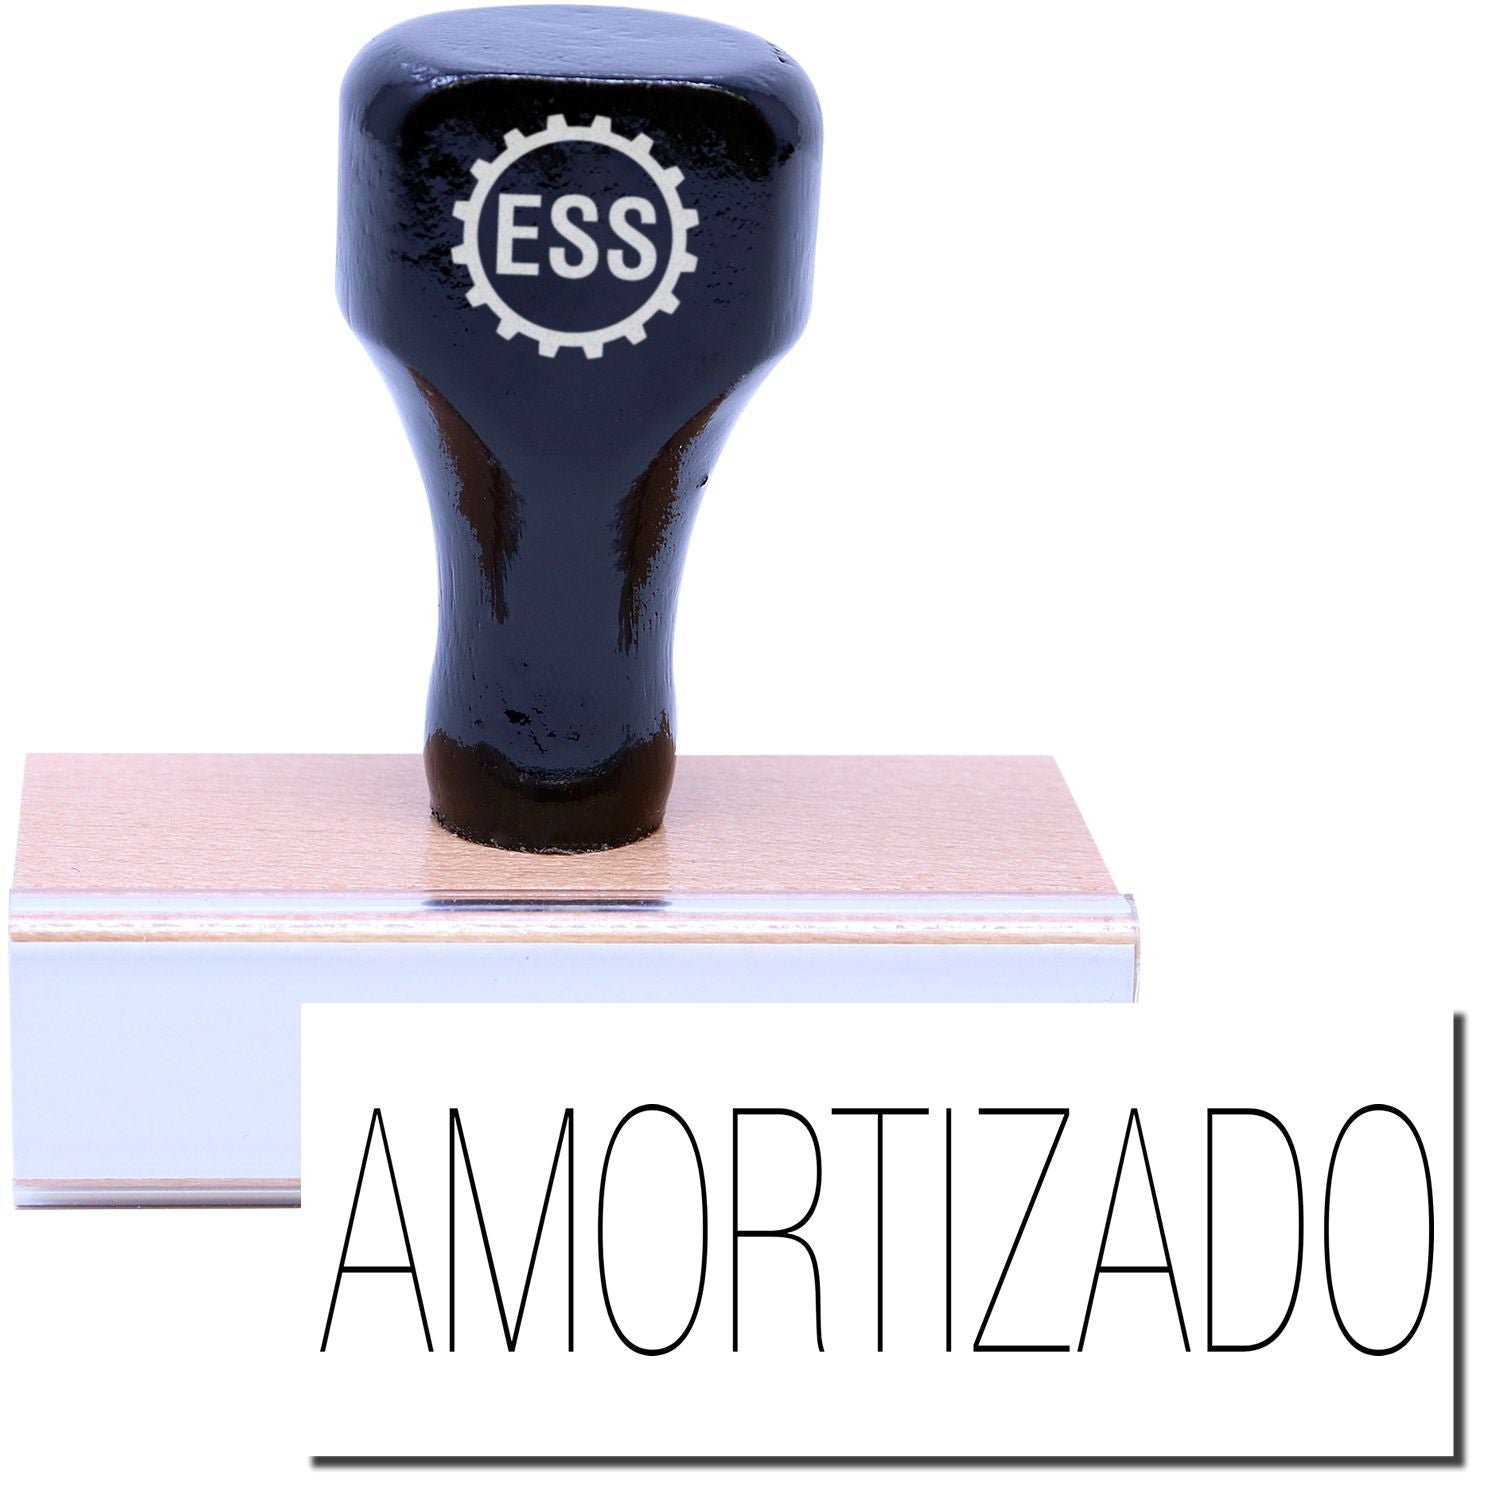 A stock office rubber stamp with a stamped image showing how the text "AMORTIZADO" is displayed after stamping.